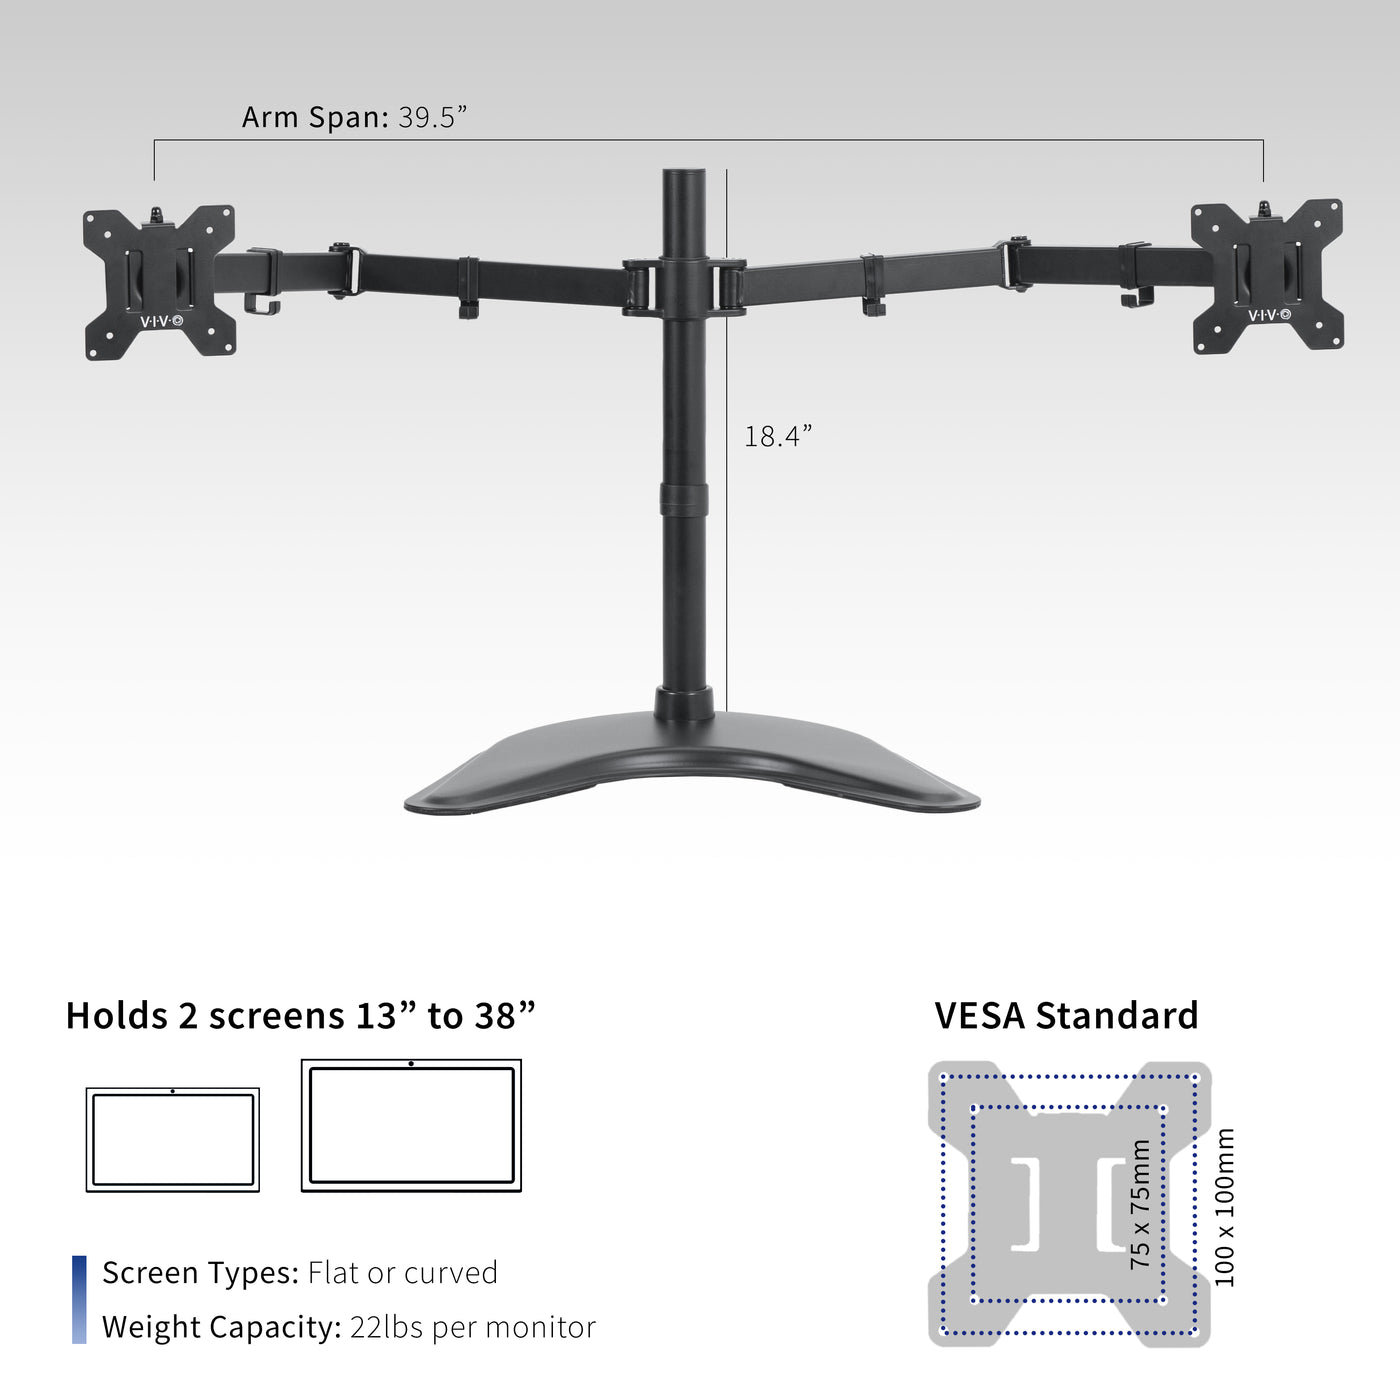 Sturdy adjustable dual monitor stand dimensions and weight capacity.